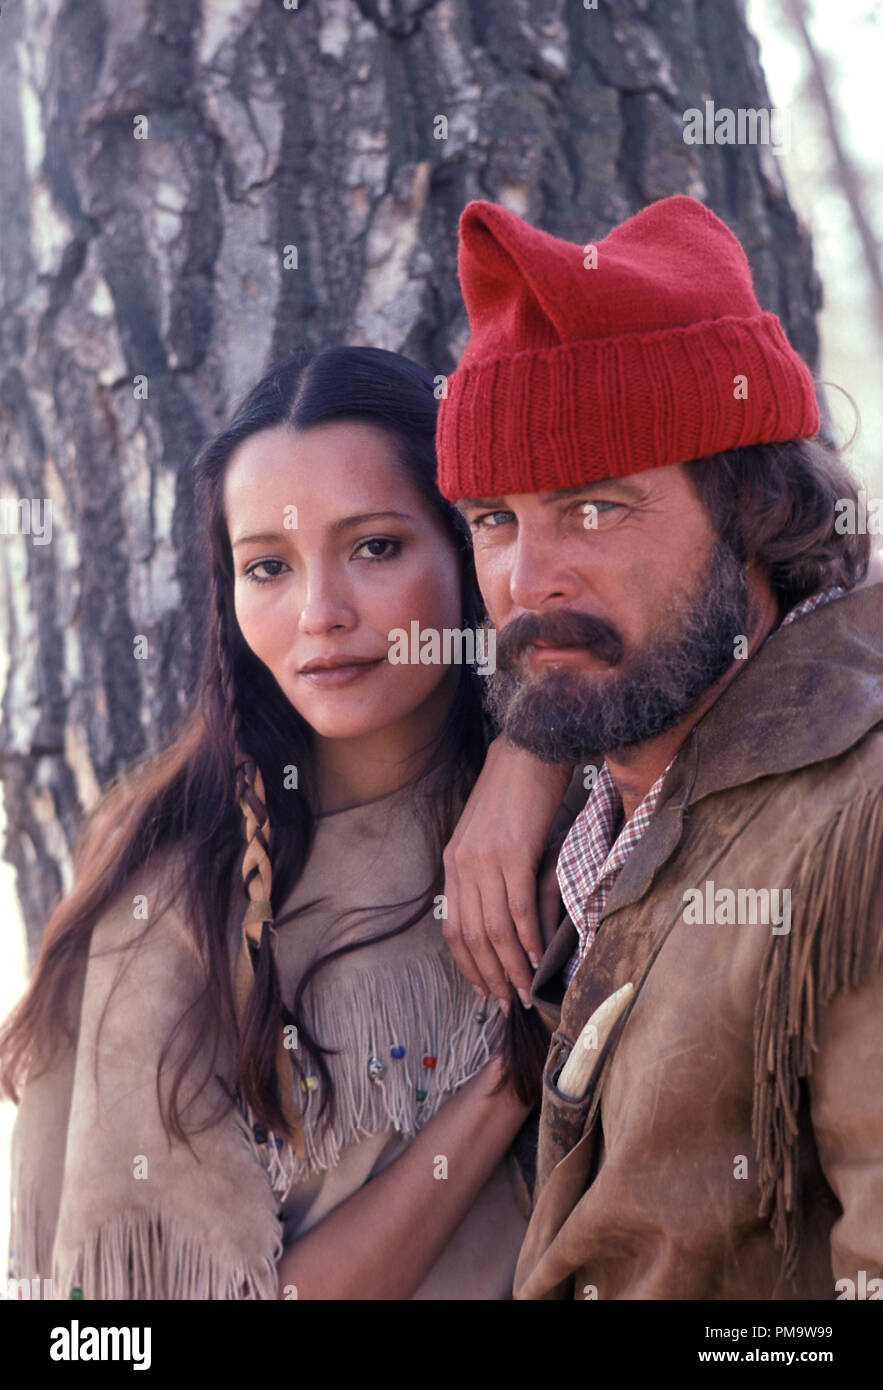 Studio Publicity Still from 'Centennial' Barbara Carrera, Robert Conrad 1978  All Rights Reserved   File Reference # 31720226THA  For Editorial Use Only Stock Photo